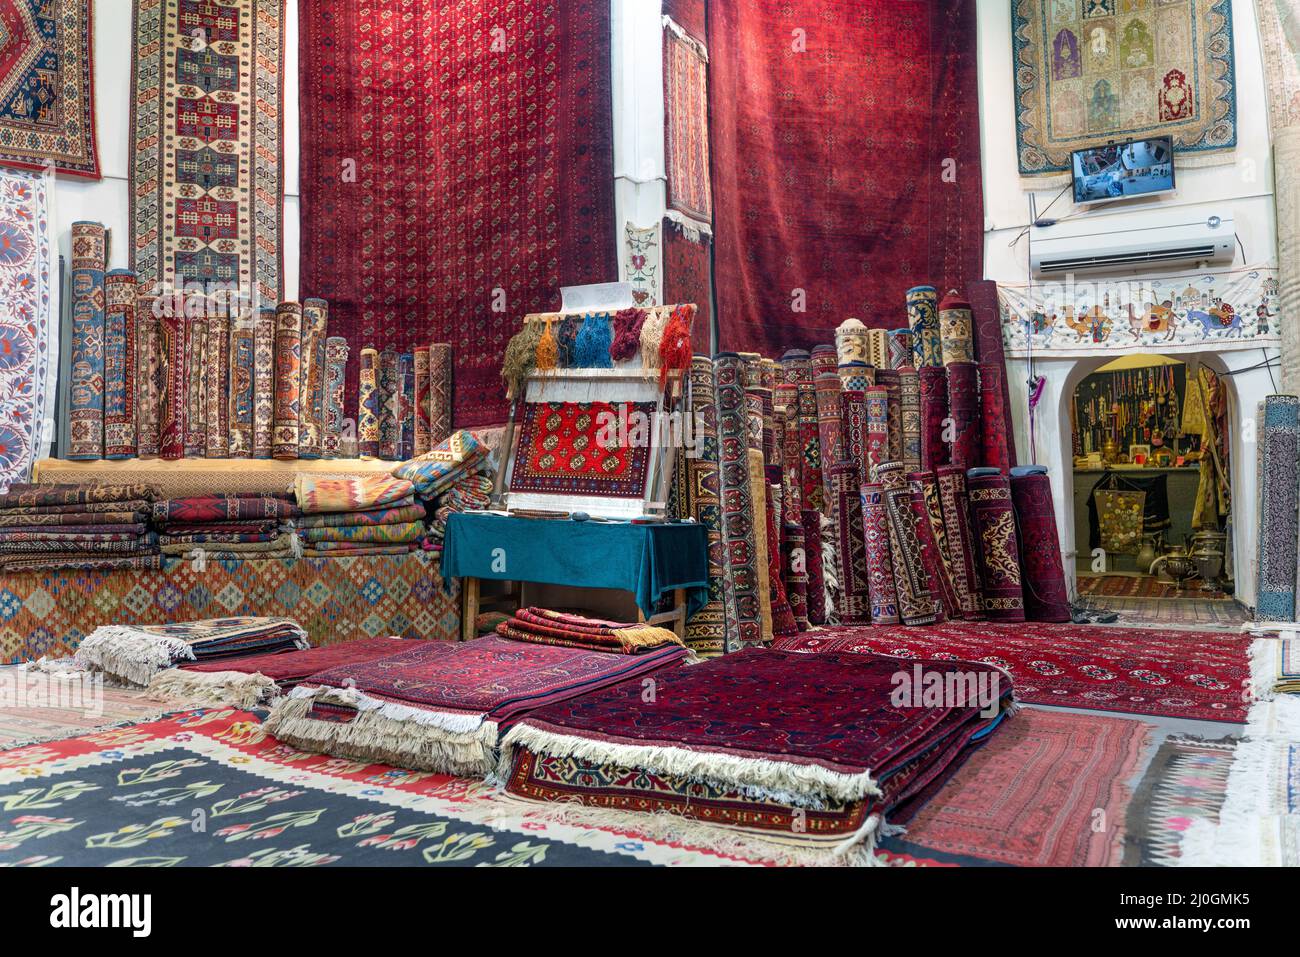 The old carpet market in Bukhara Stock Photo